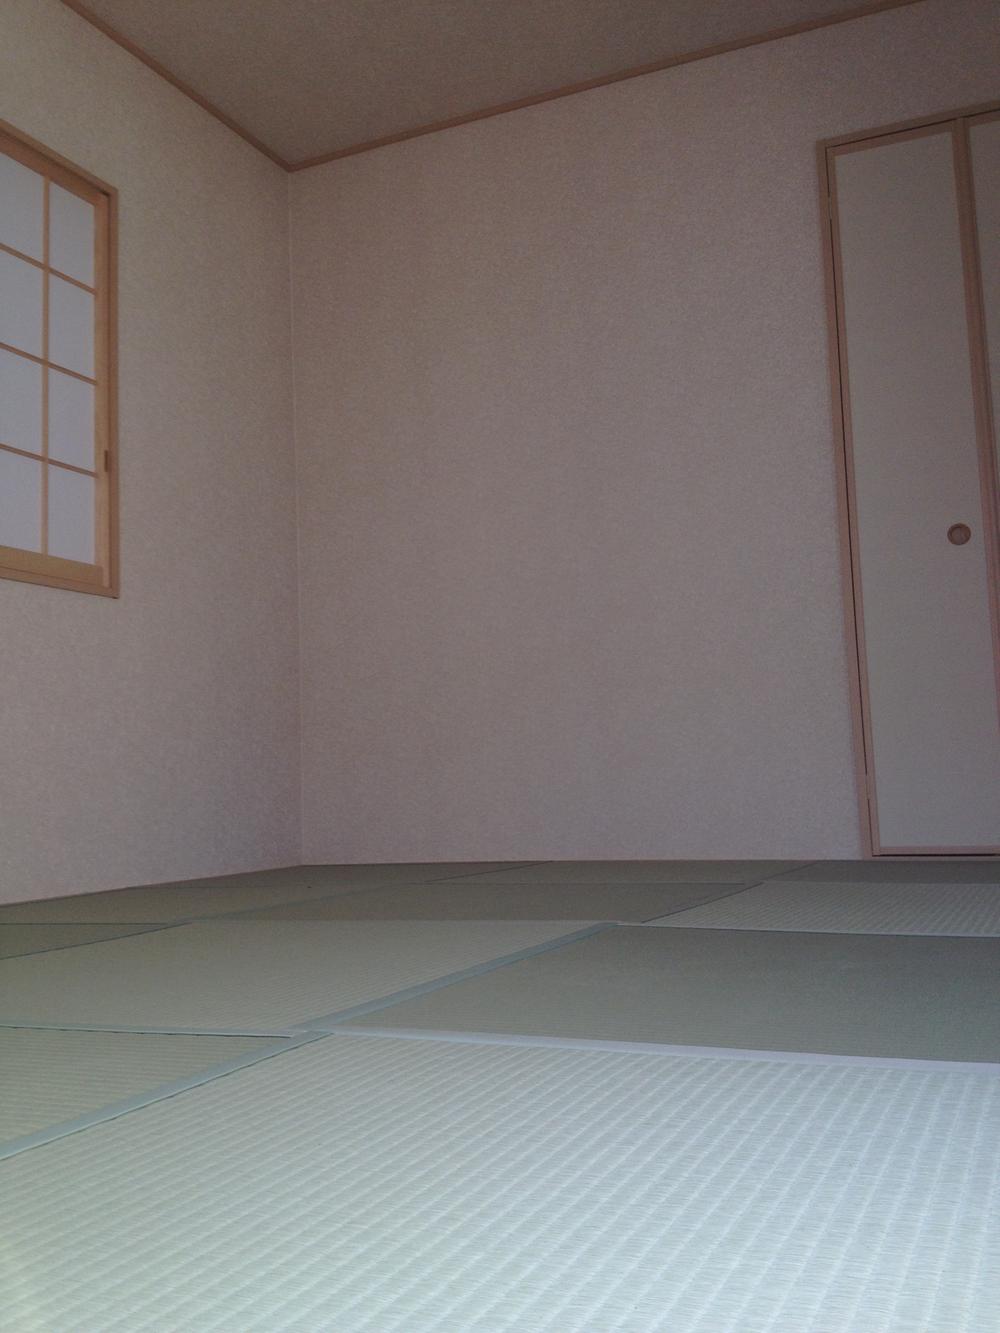 Non-living room. Local (11 May 2013) is a modern Japanese-style room